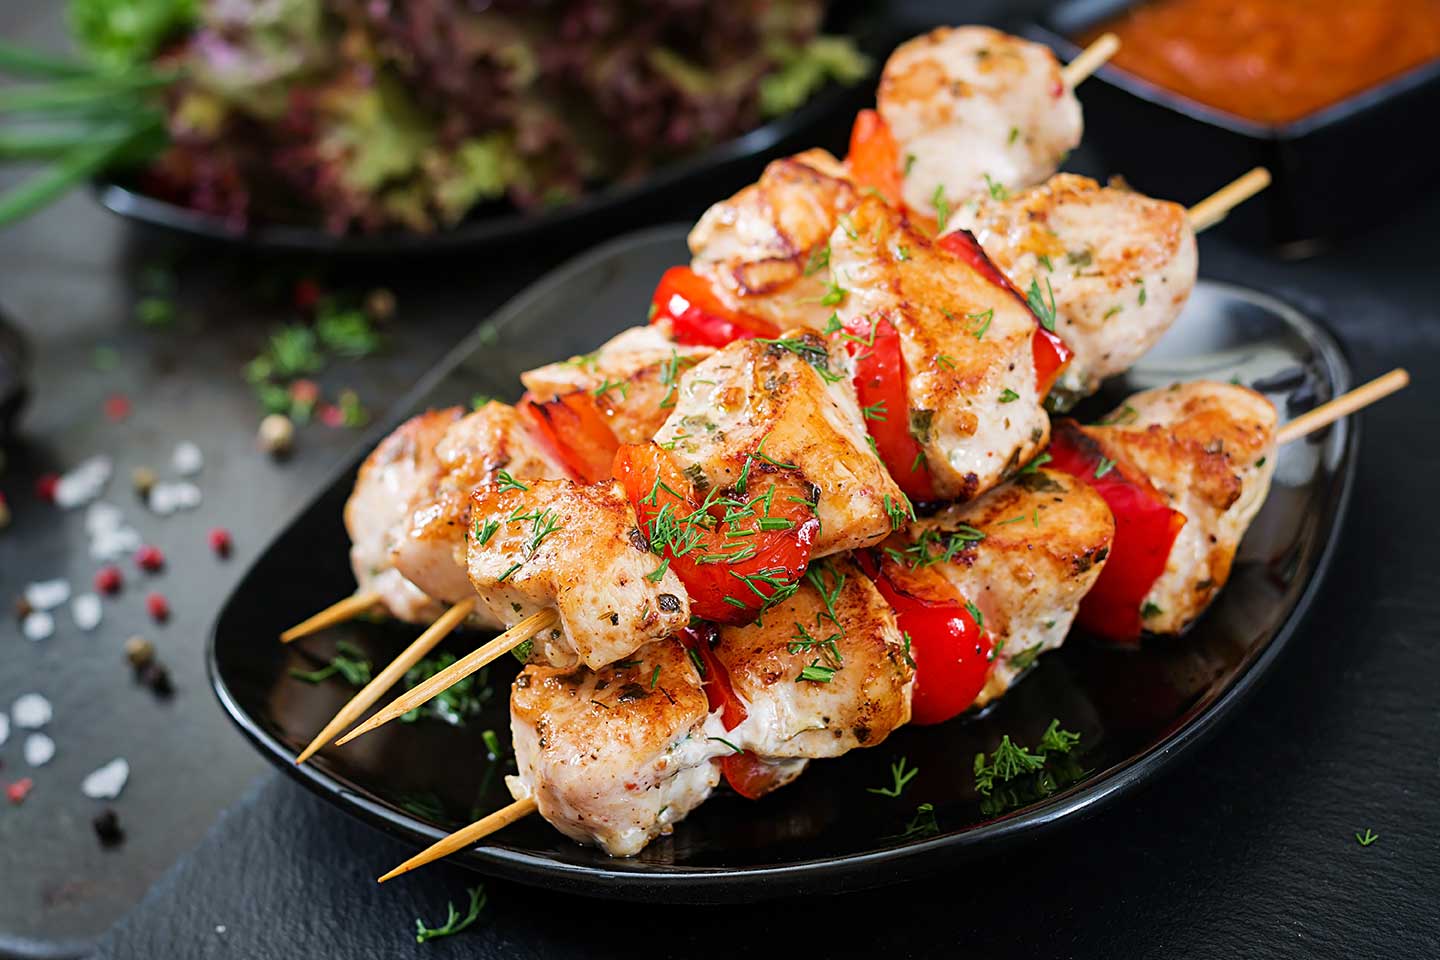 Chicken skewers with slices of sweet peppers and dill. Tasty foo